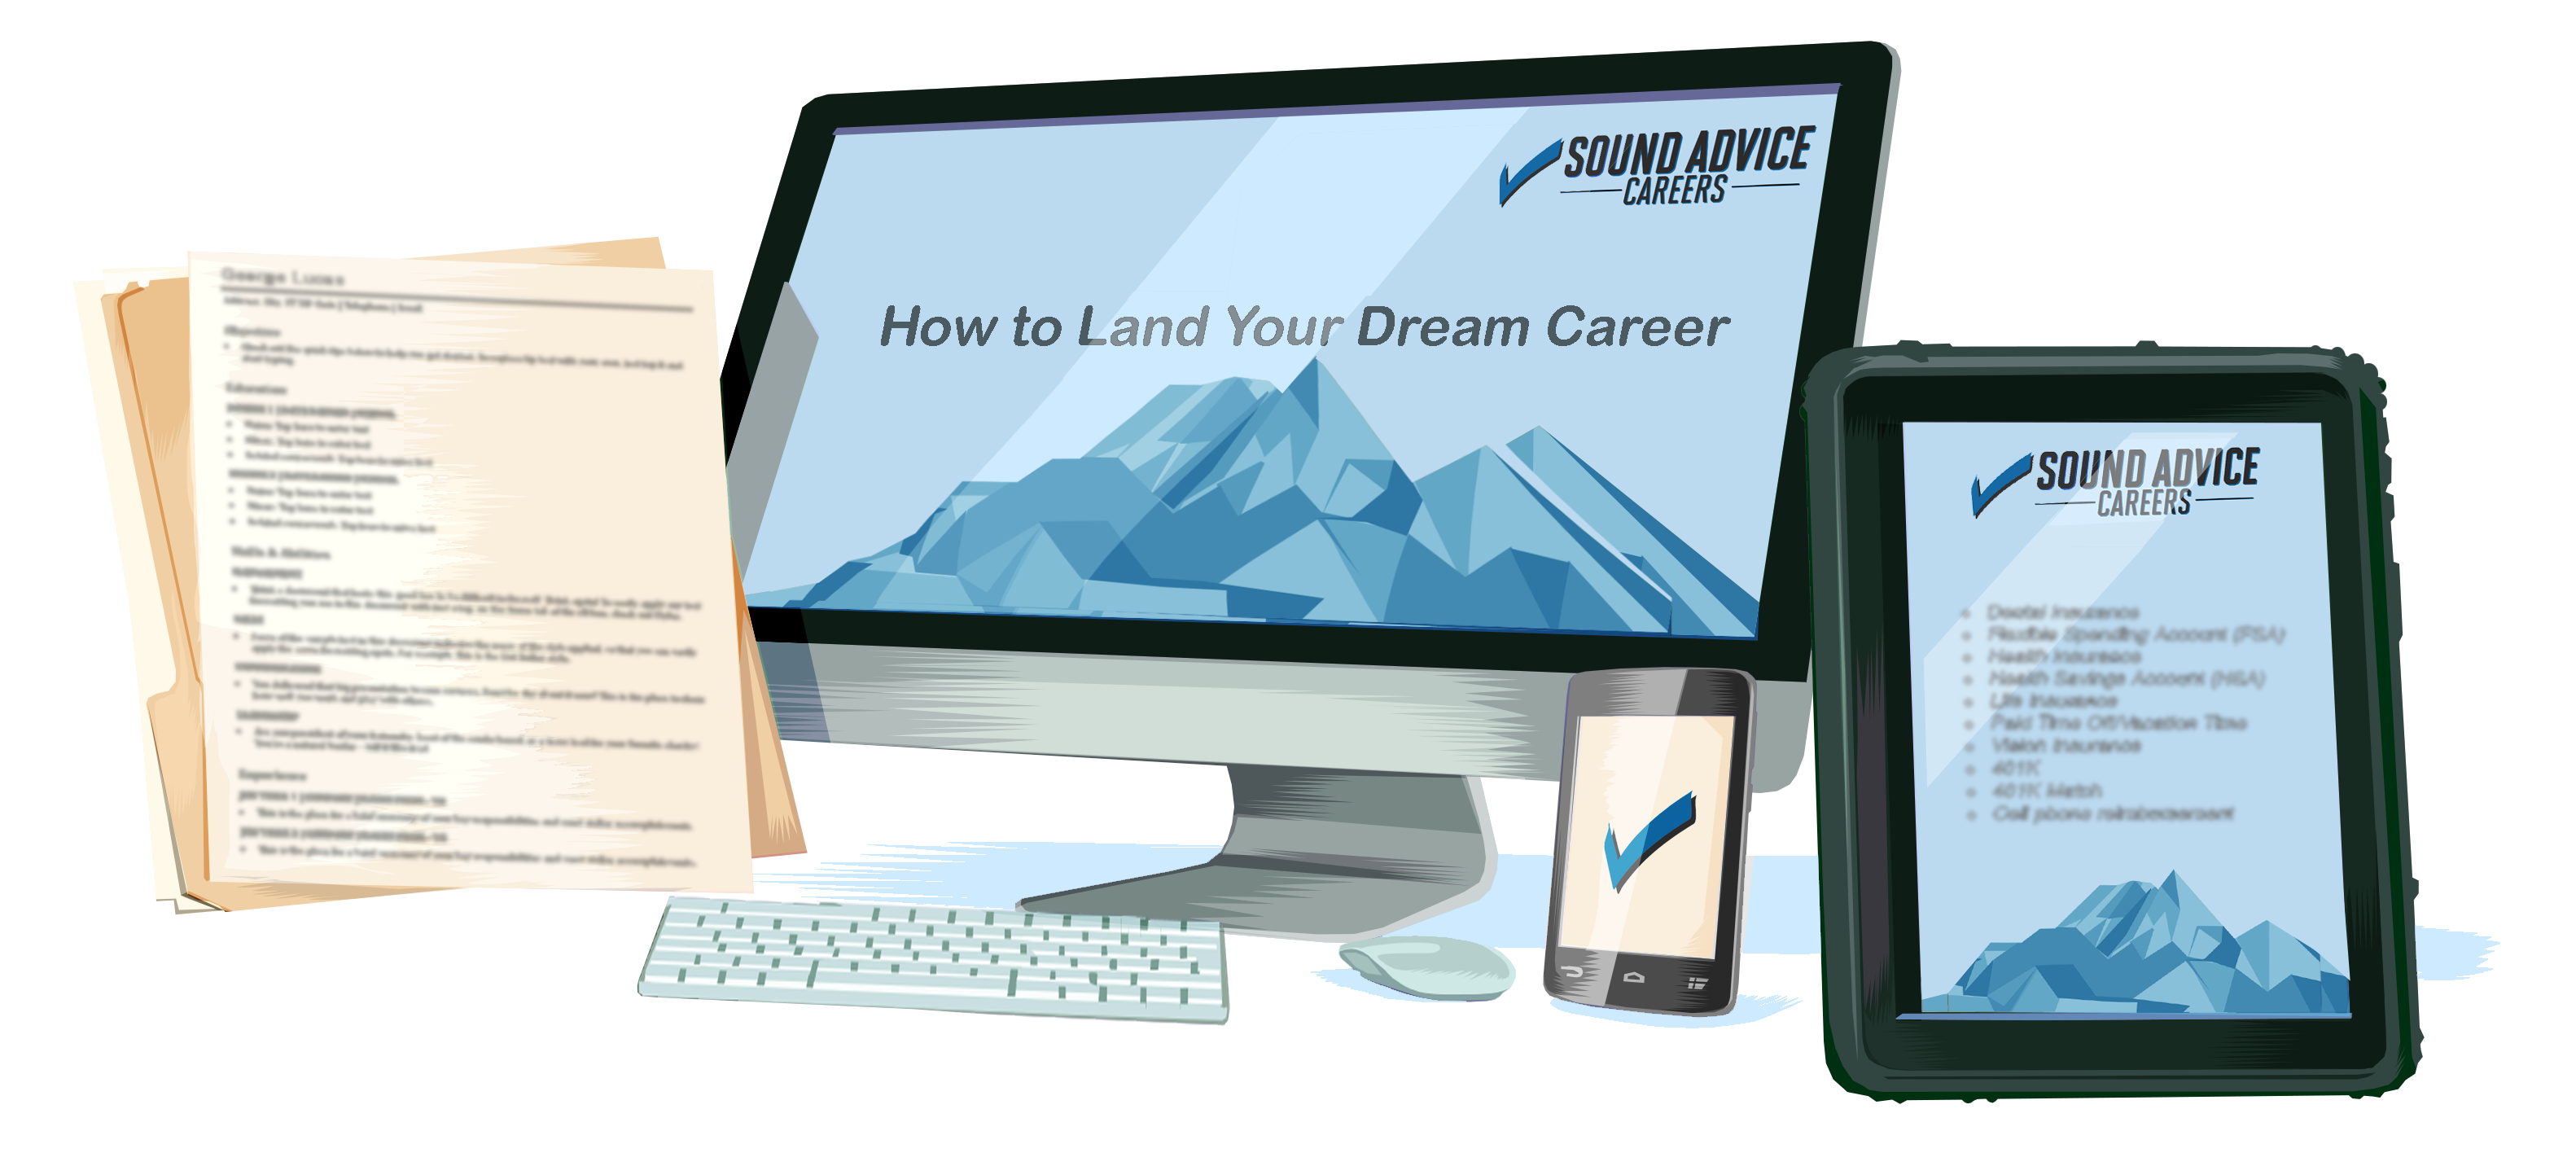 How to land the Dream Career